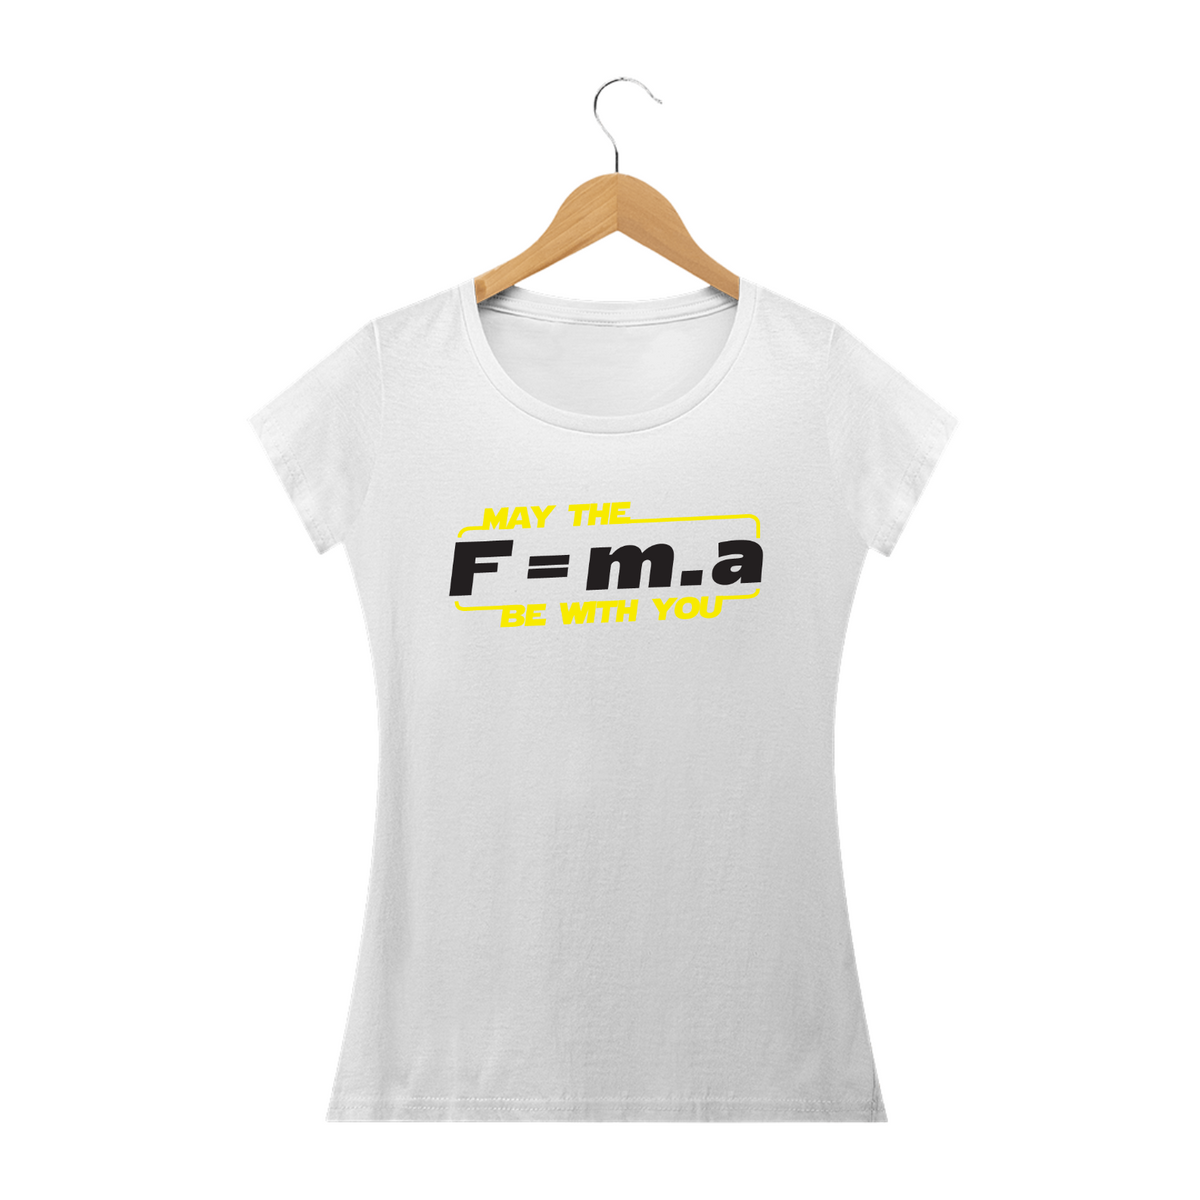 Nome do produto: May the F=m.a be with you (cores claras)